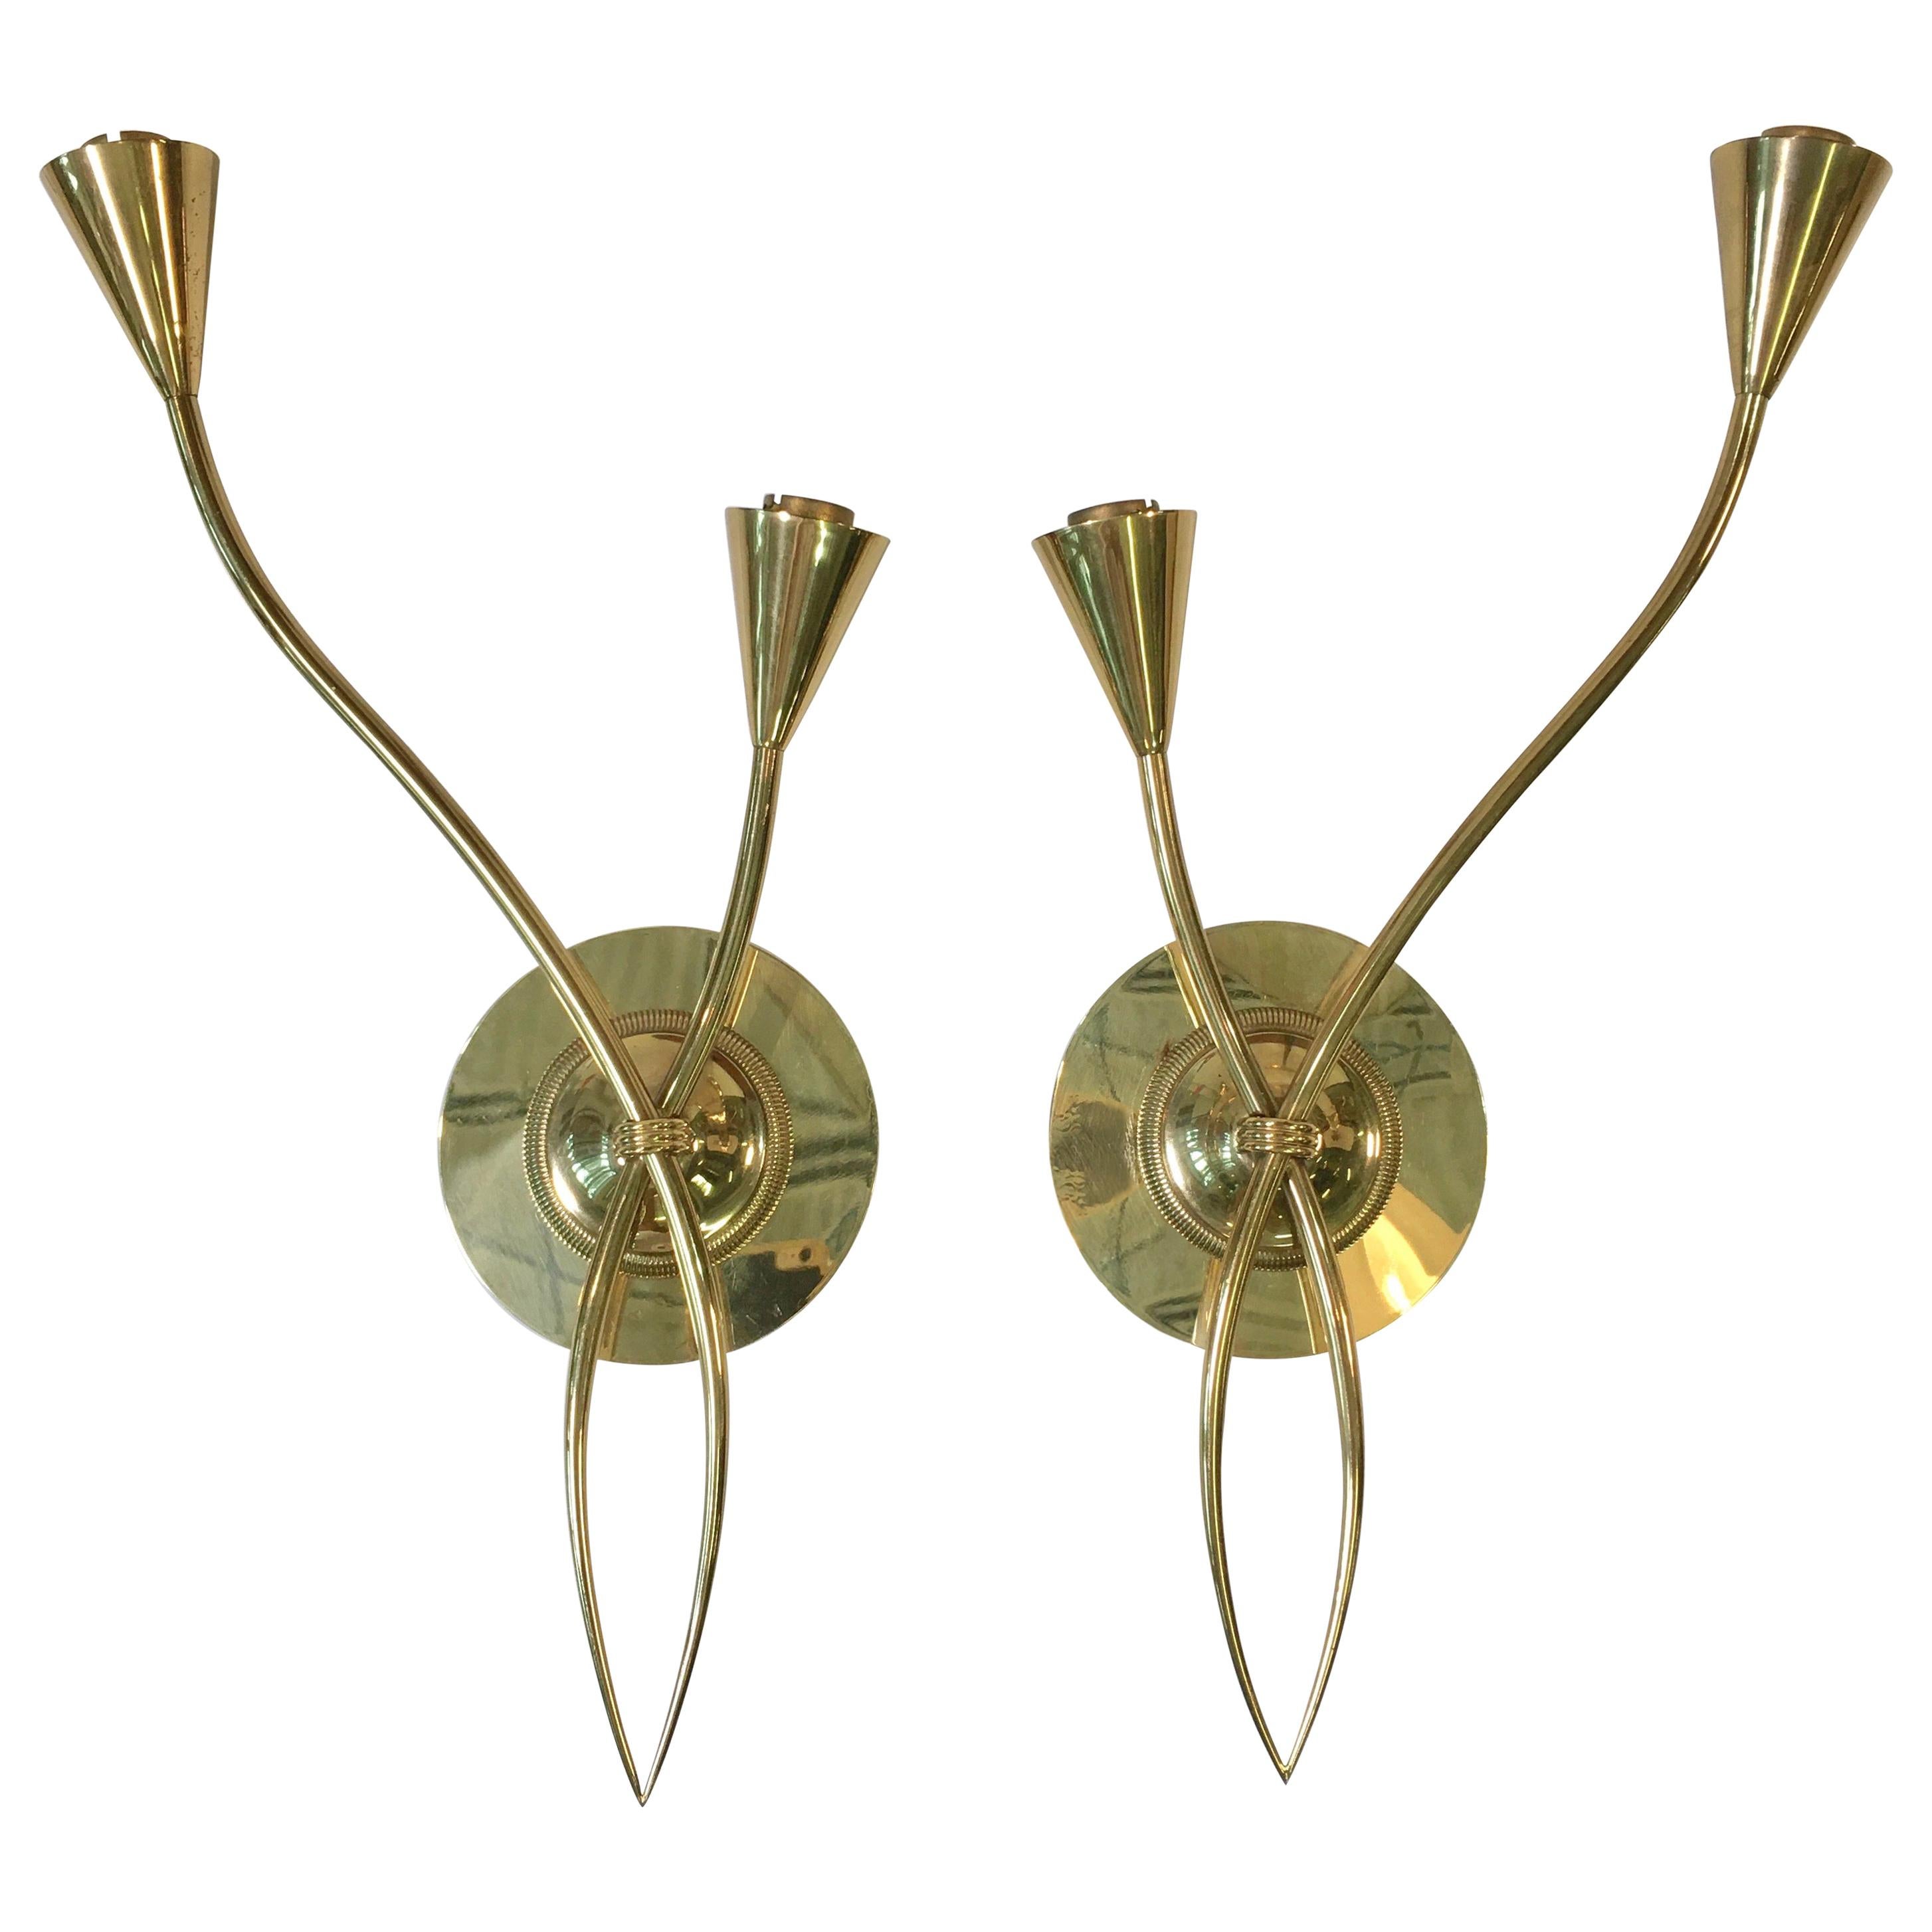 Pair of Arum Sconces by Maison Arlus